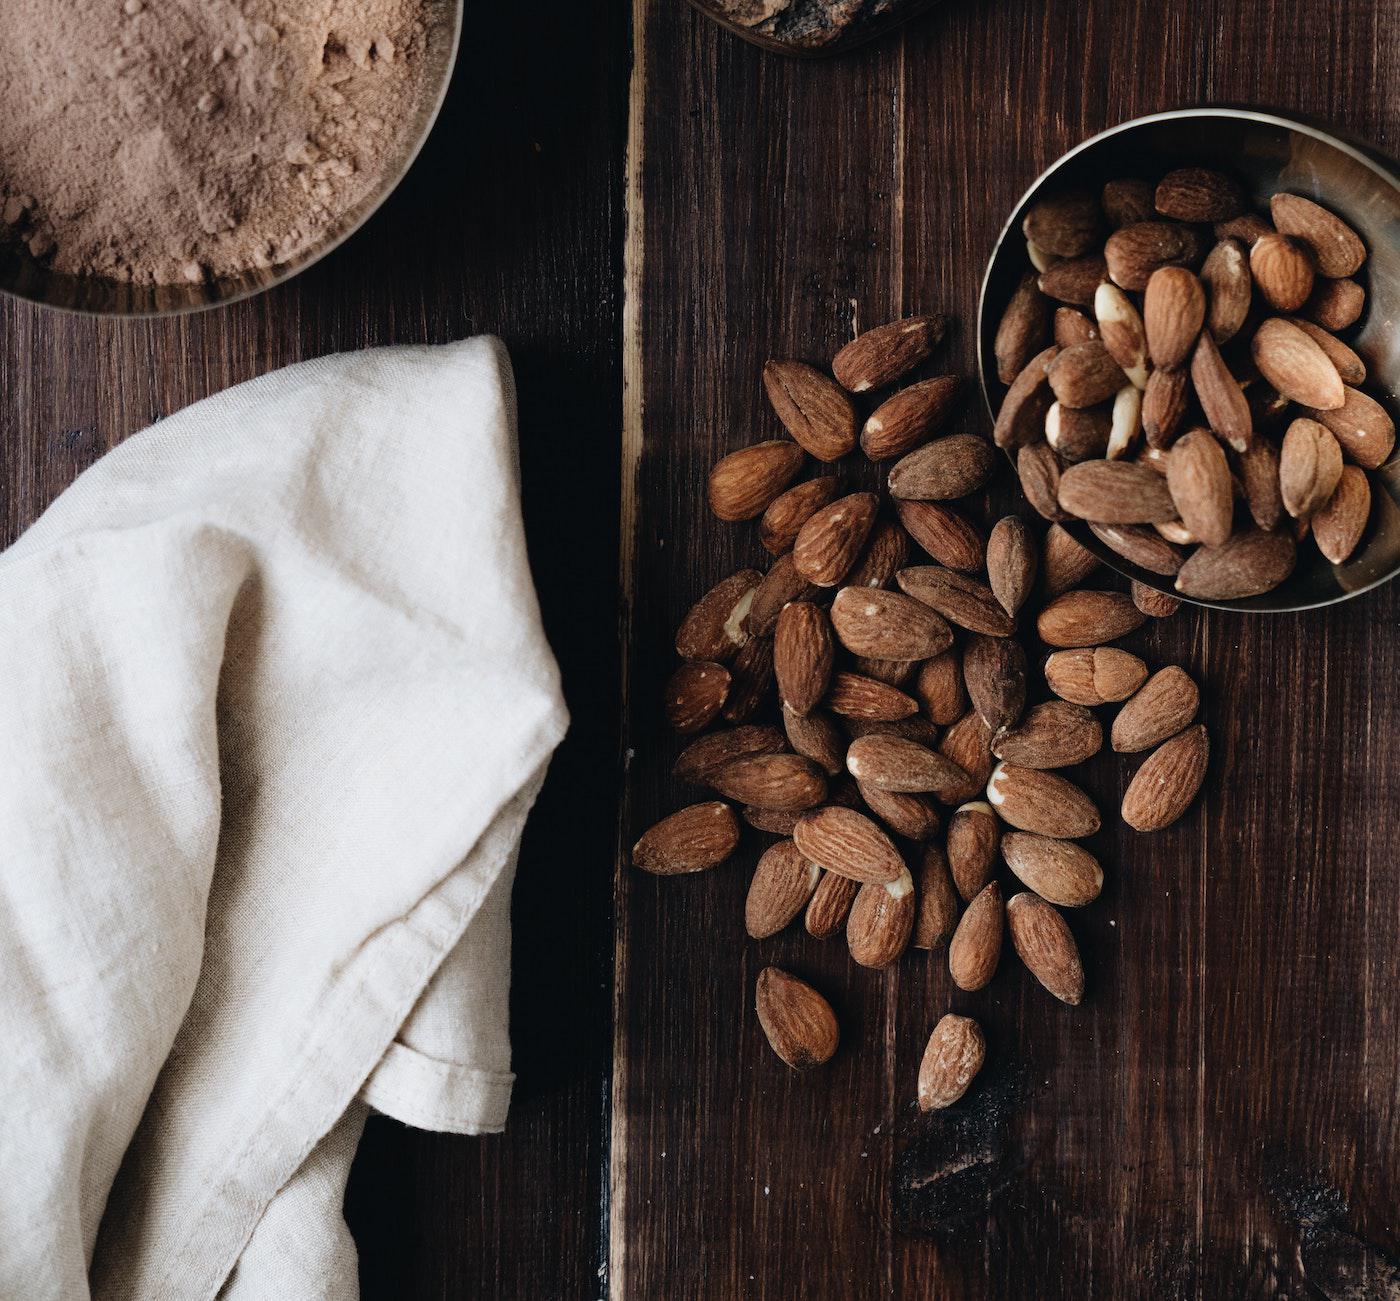 Almonds: Nutrition Facts, Health Benefits and More